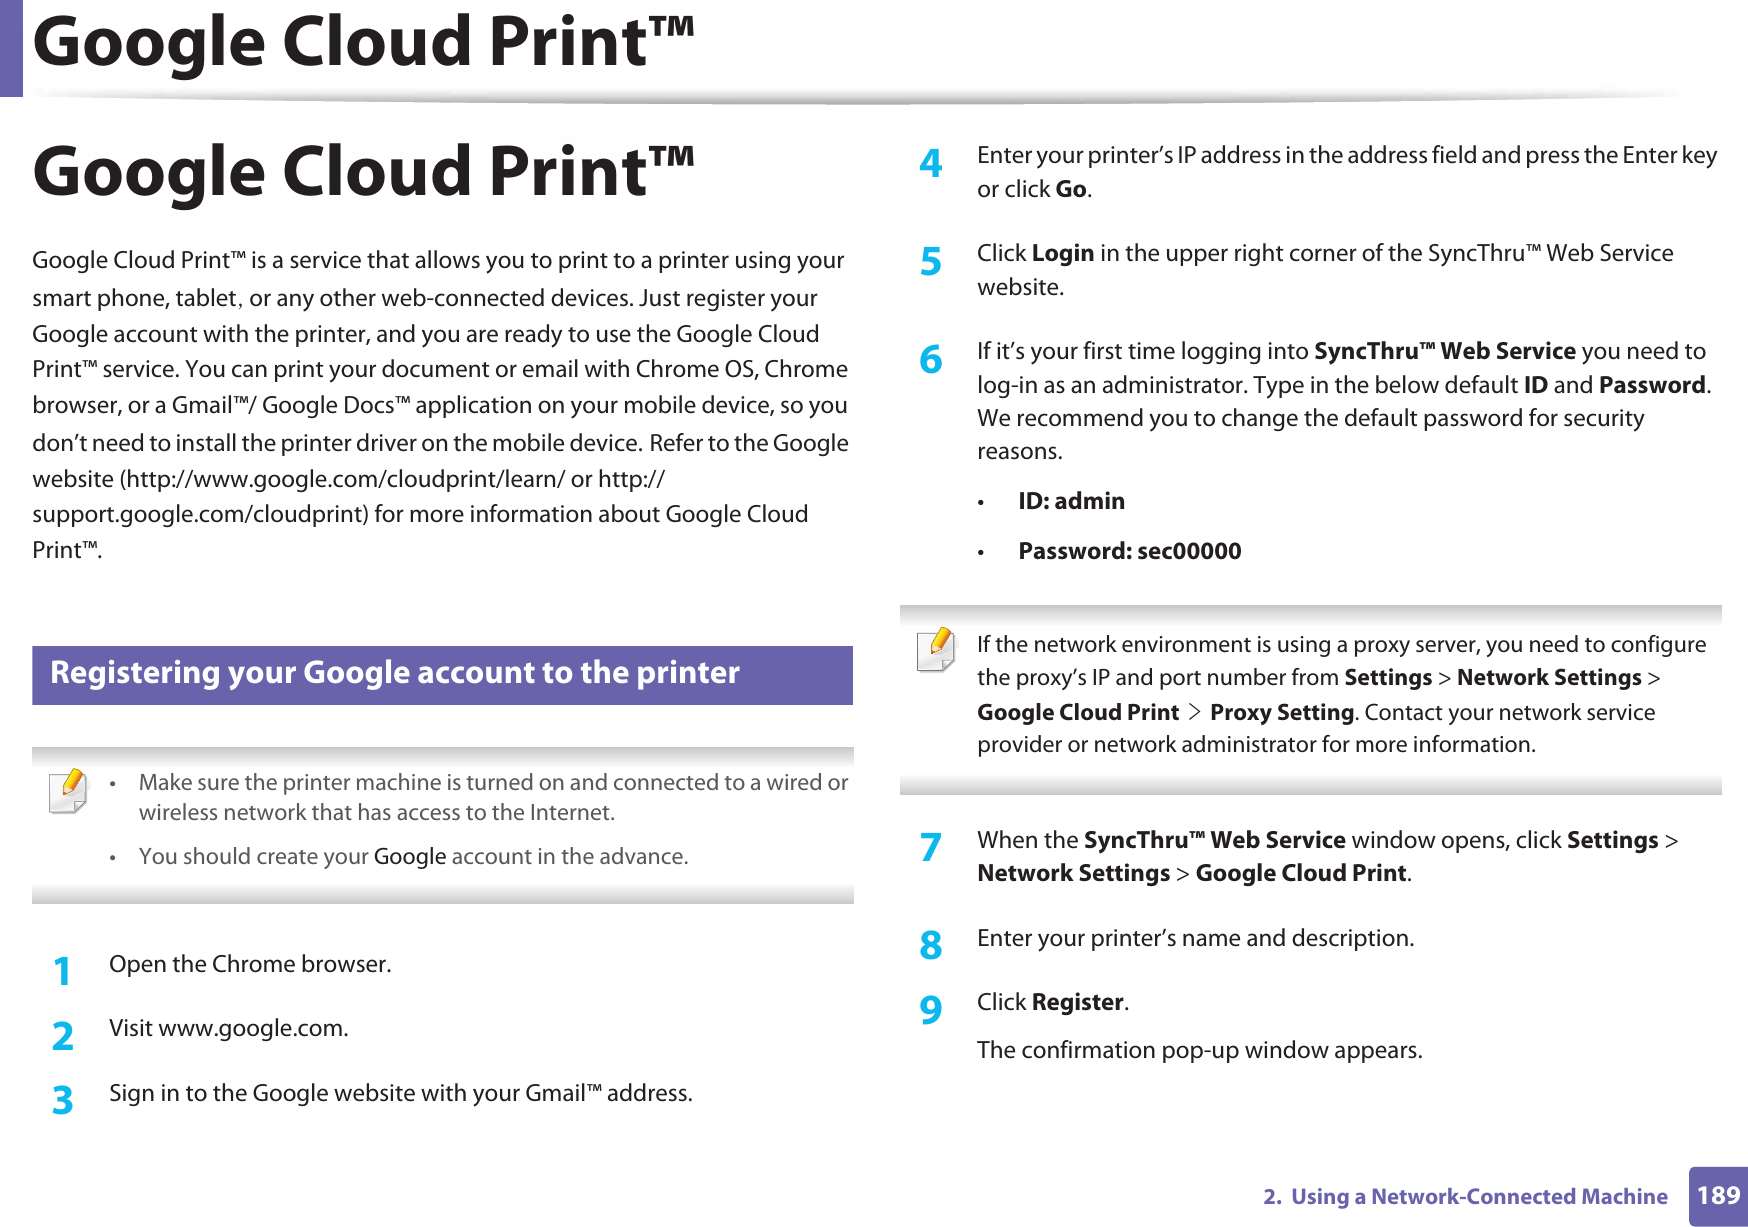 Google Cloud Print™1892.  Using a Network-Connected MachineGoogle Cloud Print™Google Cloud Print™ is a service that allows you to print to a printer using your smart phone, tabletS or any other web-connected devices. Just register your Google account with the printer, and you are ready to use the Google Cloud Print™ service. You can print your document or email with Chrome OS, Chrome browser, or a Gmail™/ Google Docs™ application on your mobile device, so you don’t need to install the printer driver on the mobile device.GRefer to the Google website (http://www.google.com/cloudprint/learn/ or http://support.google.com/cloudprint) for more information about Google Cloud Print™.28 Registering your Google account to the printer • Make sure the printer machine is turned on and connected to a wired or wireless network that has access to the Internet. •You should create your Google account in the advance.  1Open the Chrome browser.2  Visit www.google.com.3  Sign in to the Google website with your Gmail™ address.4  Enter your printer’s IP address in the address field and press the Enter key or click Go.5  Click Login in the upper right corner of the SyncThru™ Web Service website.6  If it’s your first time logging into SyncThru™ Web Service you need to log-in as an administrator. Type in the below default ID and Password. We recommend you to change the default password for security reasons.•ID: admin•Password: sec00000  If the network environment is using a proxy server, you need to configure the proxy’s IP and port number from Settings &gt; Network Settings &gt; Google Cloud PrintGeGProxy Setting. Contact your network service provider or network administrator for more information.  7  When the SyncThru™ Web Service window opens, click Settings &gt; Network Settings &gt; Google Cloud Print.8  Enter your printer’s name and description.9  Click Register.The confirmation pop-up window appears.